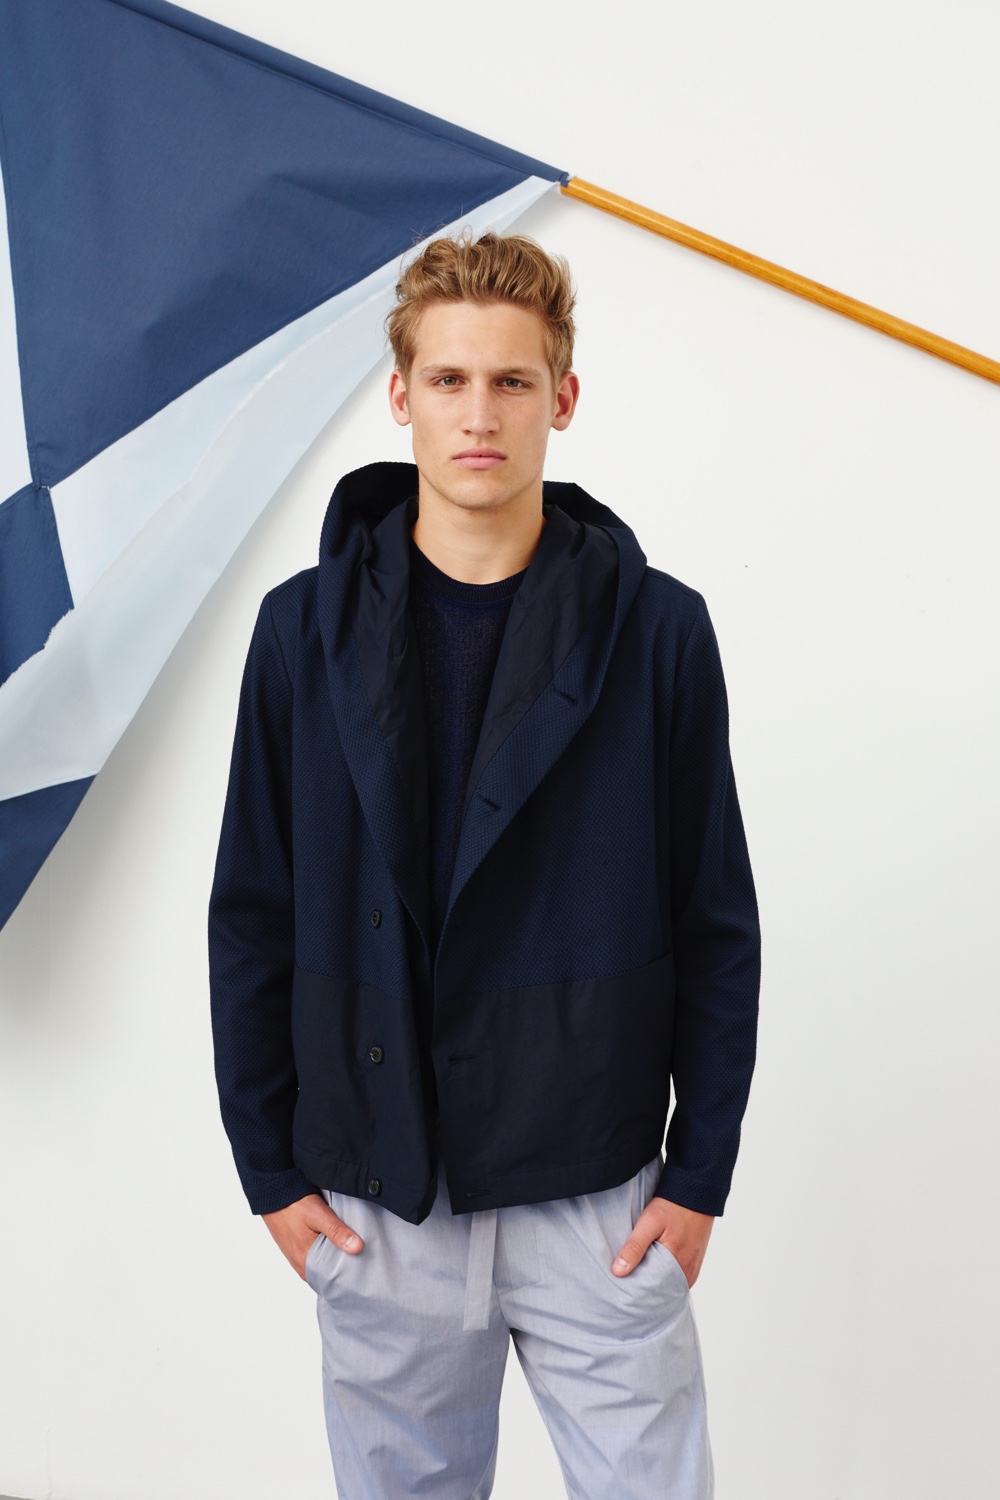 Stephan Schneider Embraces 'Flattering Flags' for Spring/Summer 2016 Menswear Collection